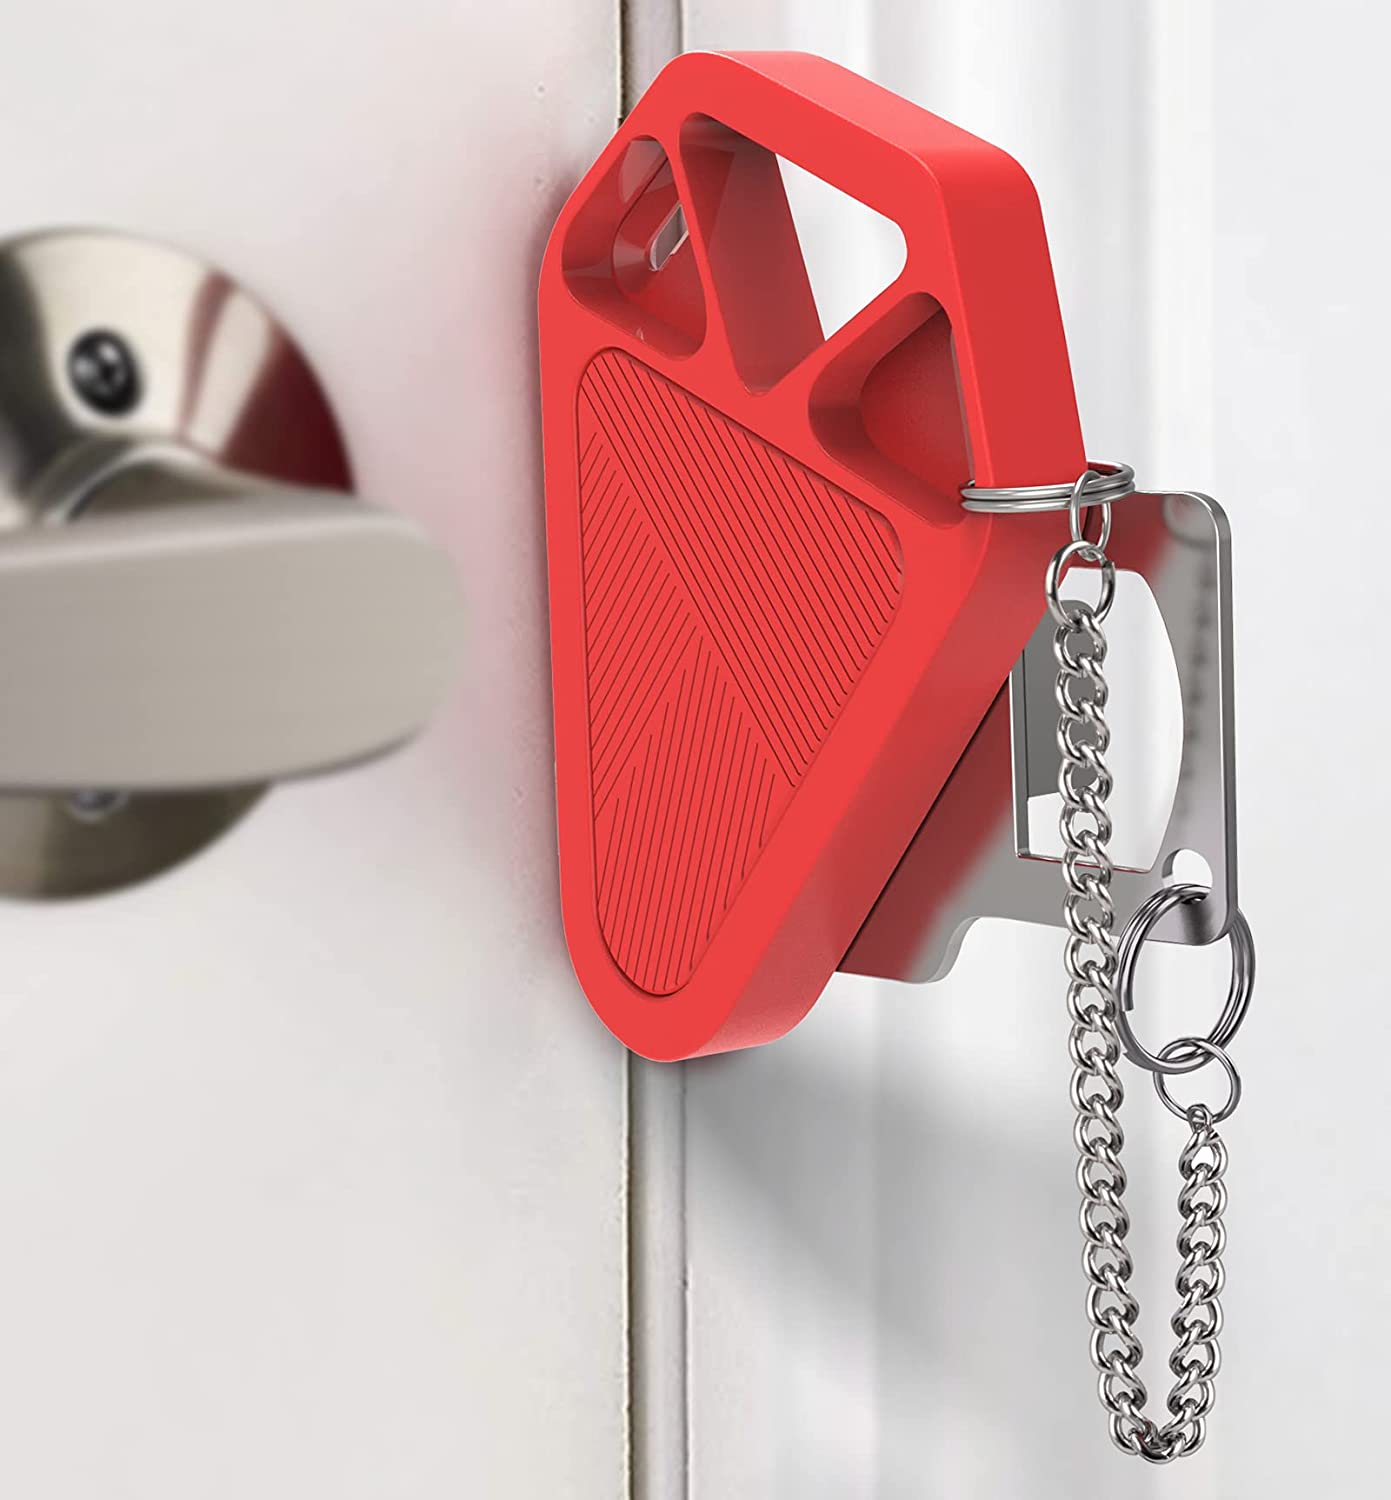 AceMining Portable Door Lock: A safety tool everyone should pack